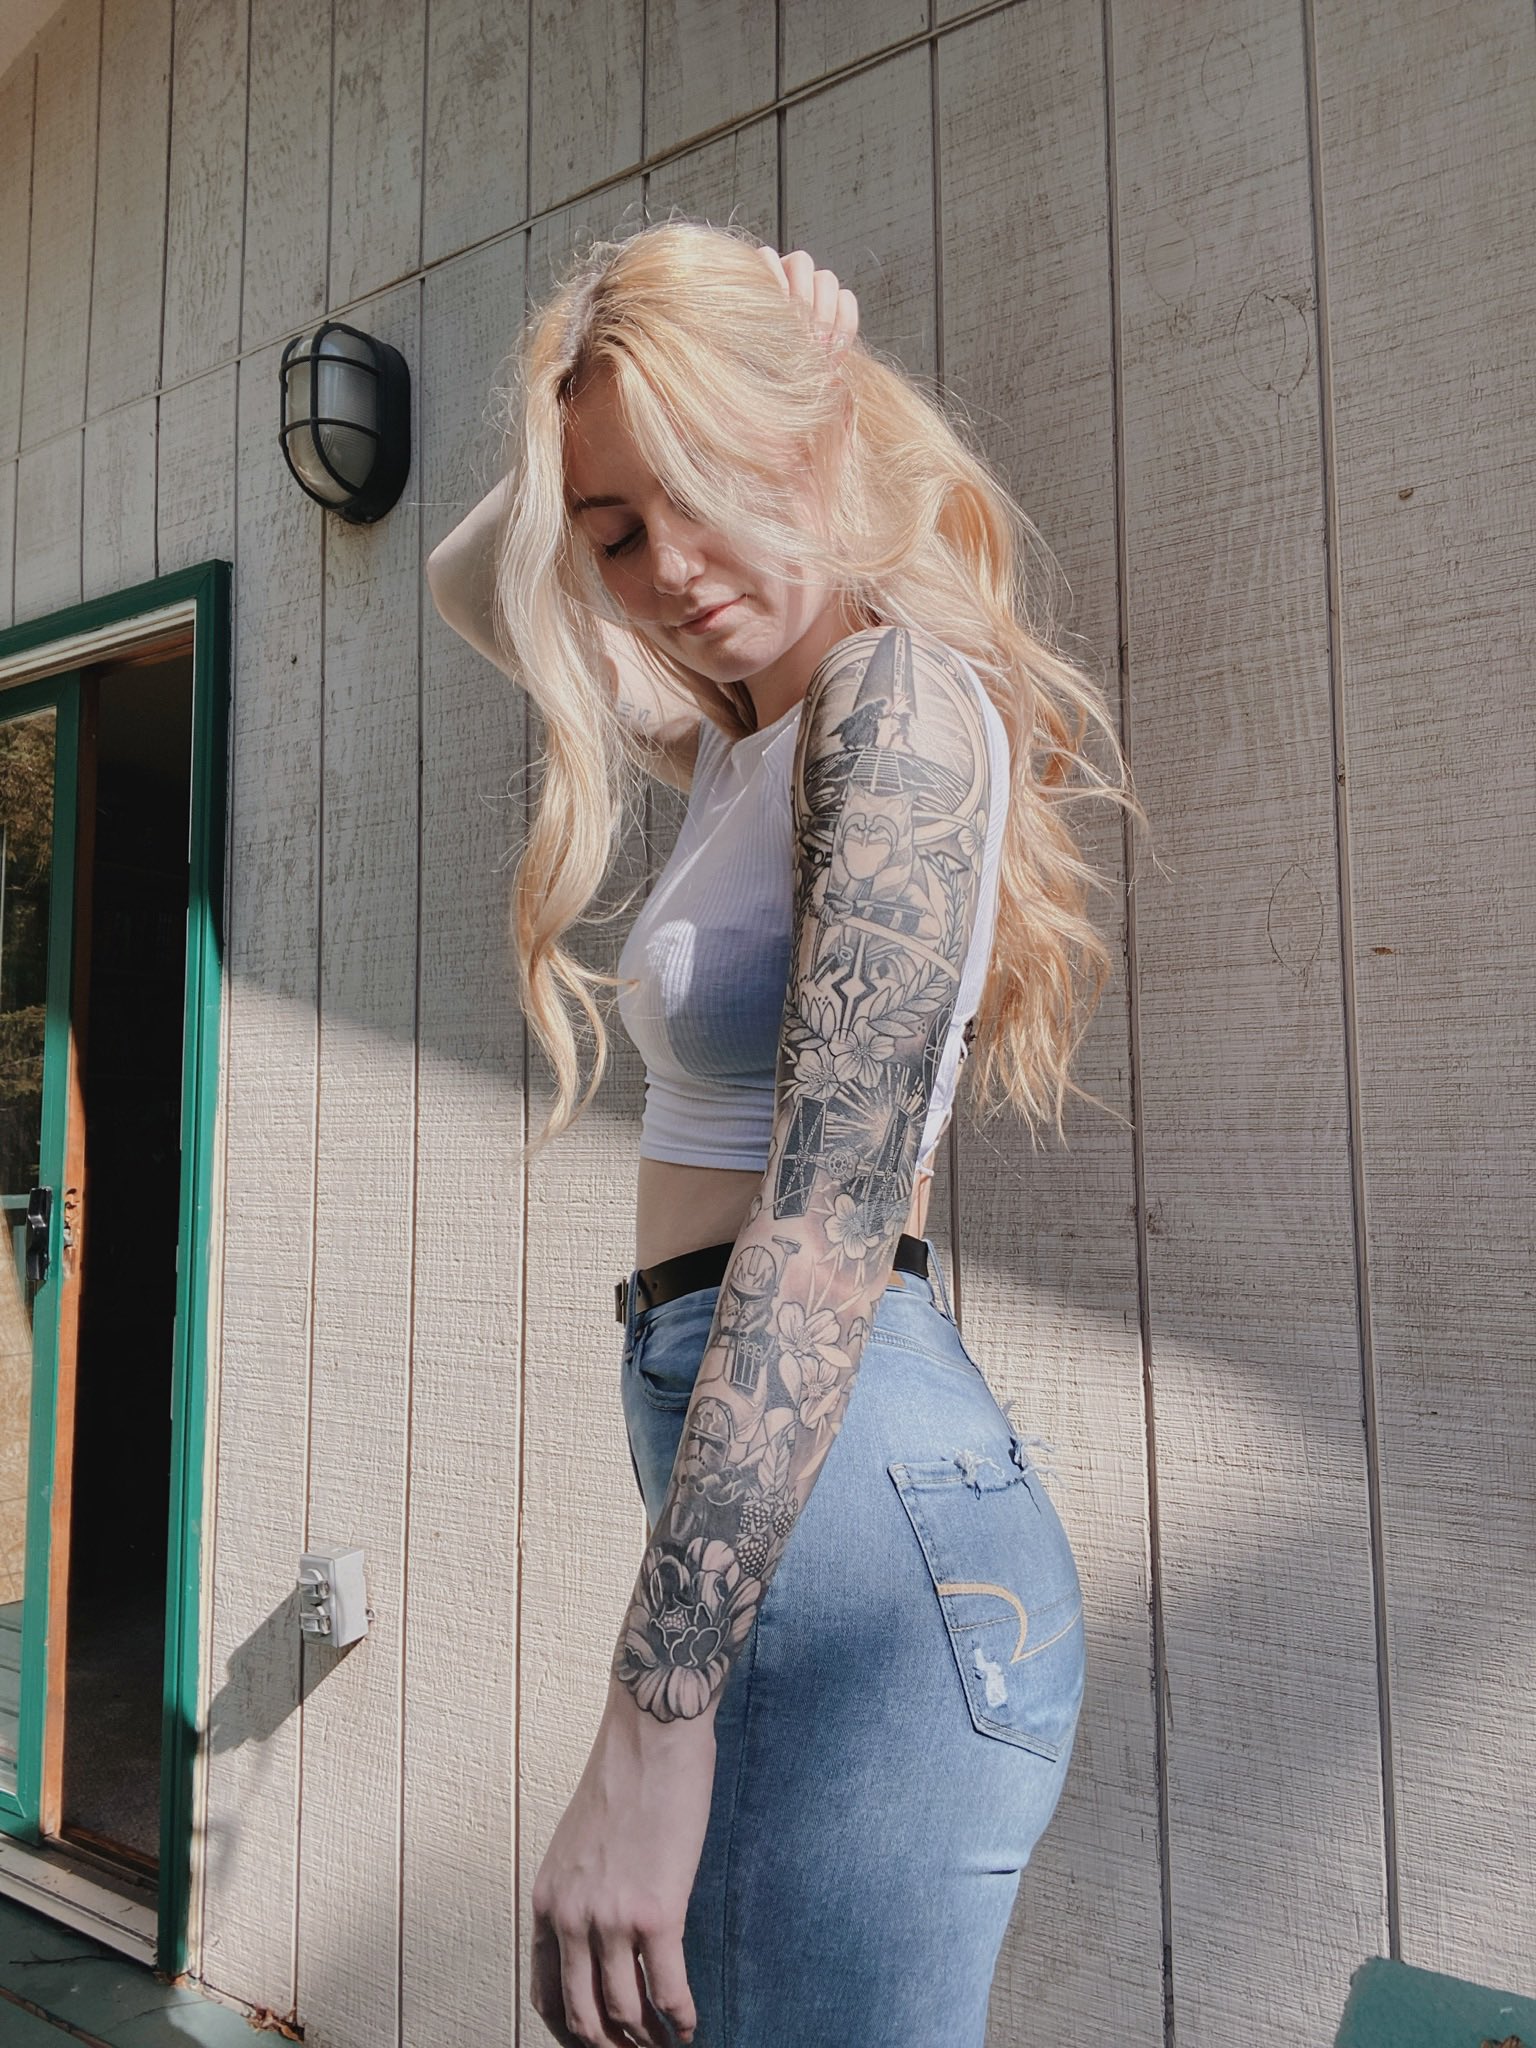 bella 🧸 on Twitter "help me be your next inked magazine cover girl